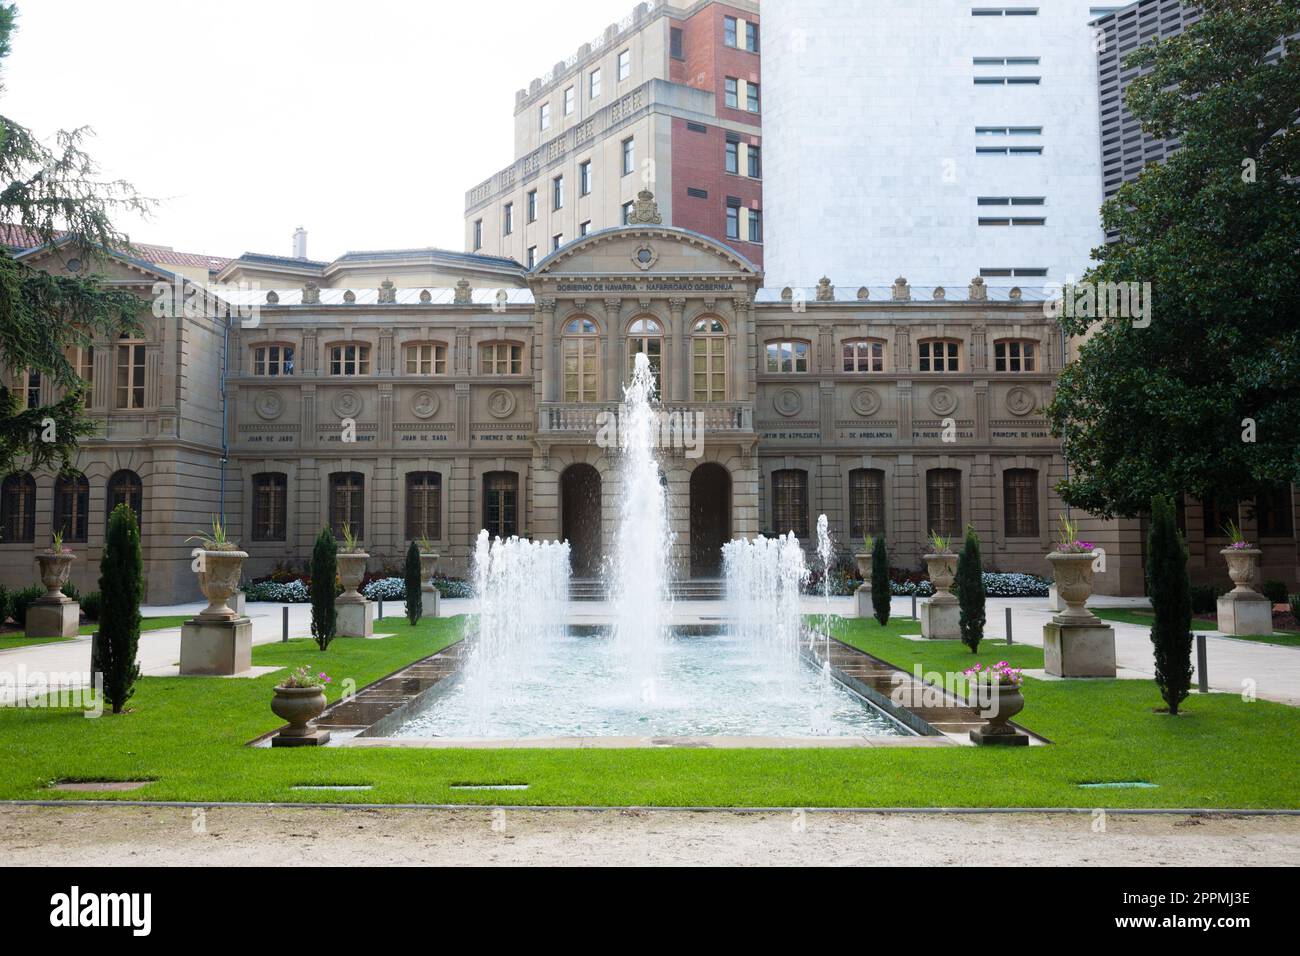 Navarre government building view, Pamplona, Spain Stock Photo